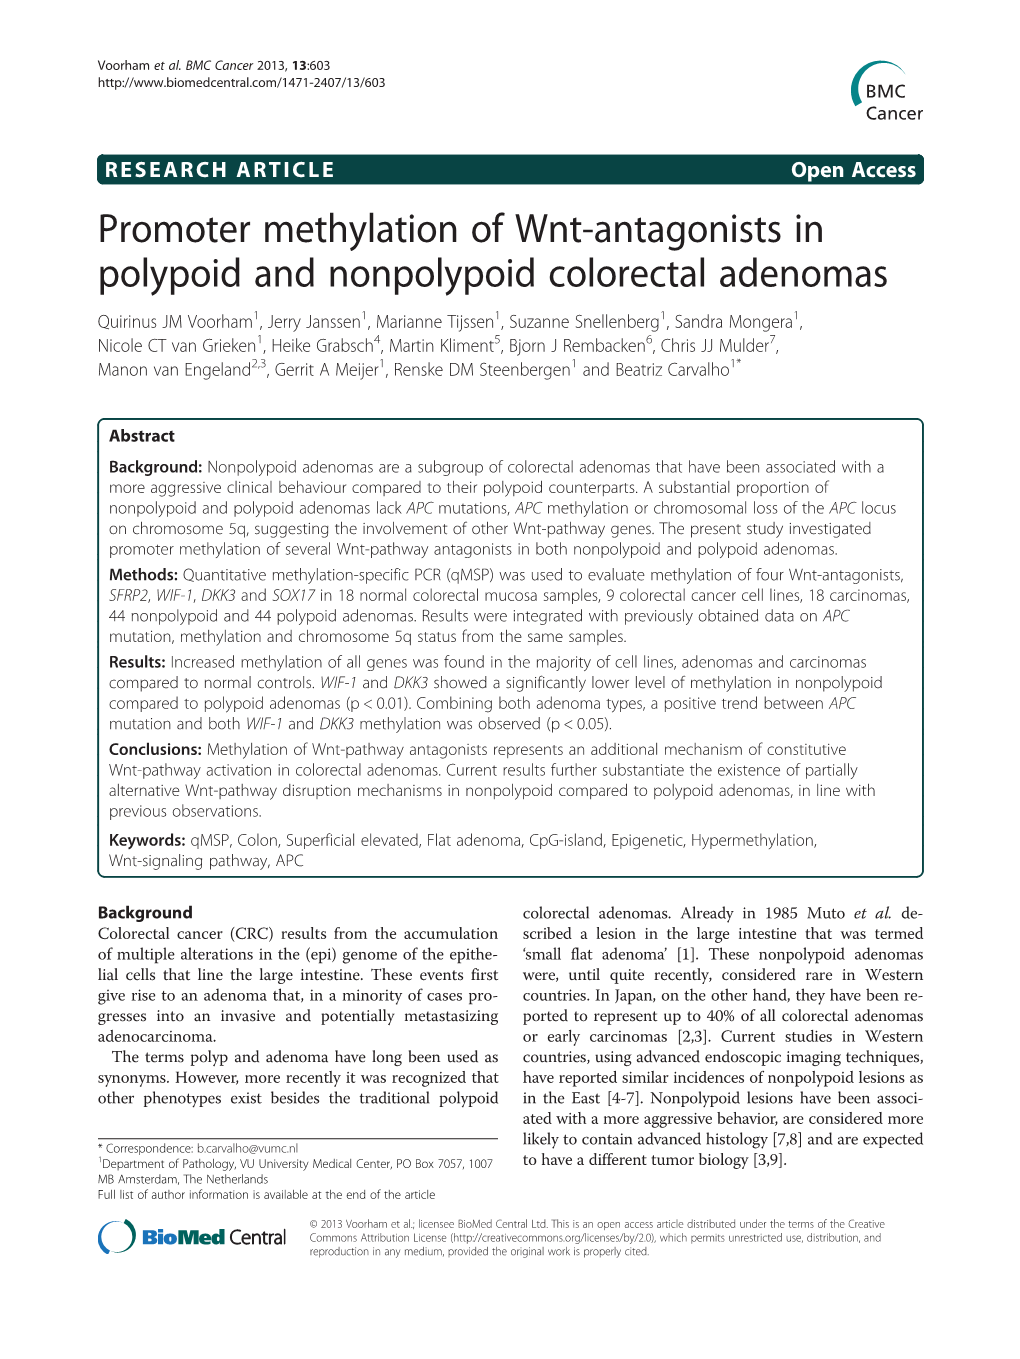 Promoter Methylation of Wnt-Antagonists in Polypoid and Nonpolypoid Colorectal Adenomas